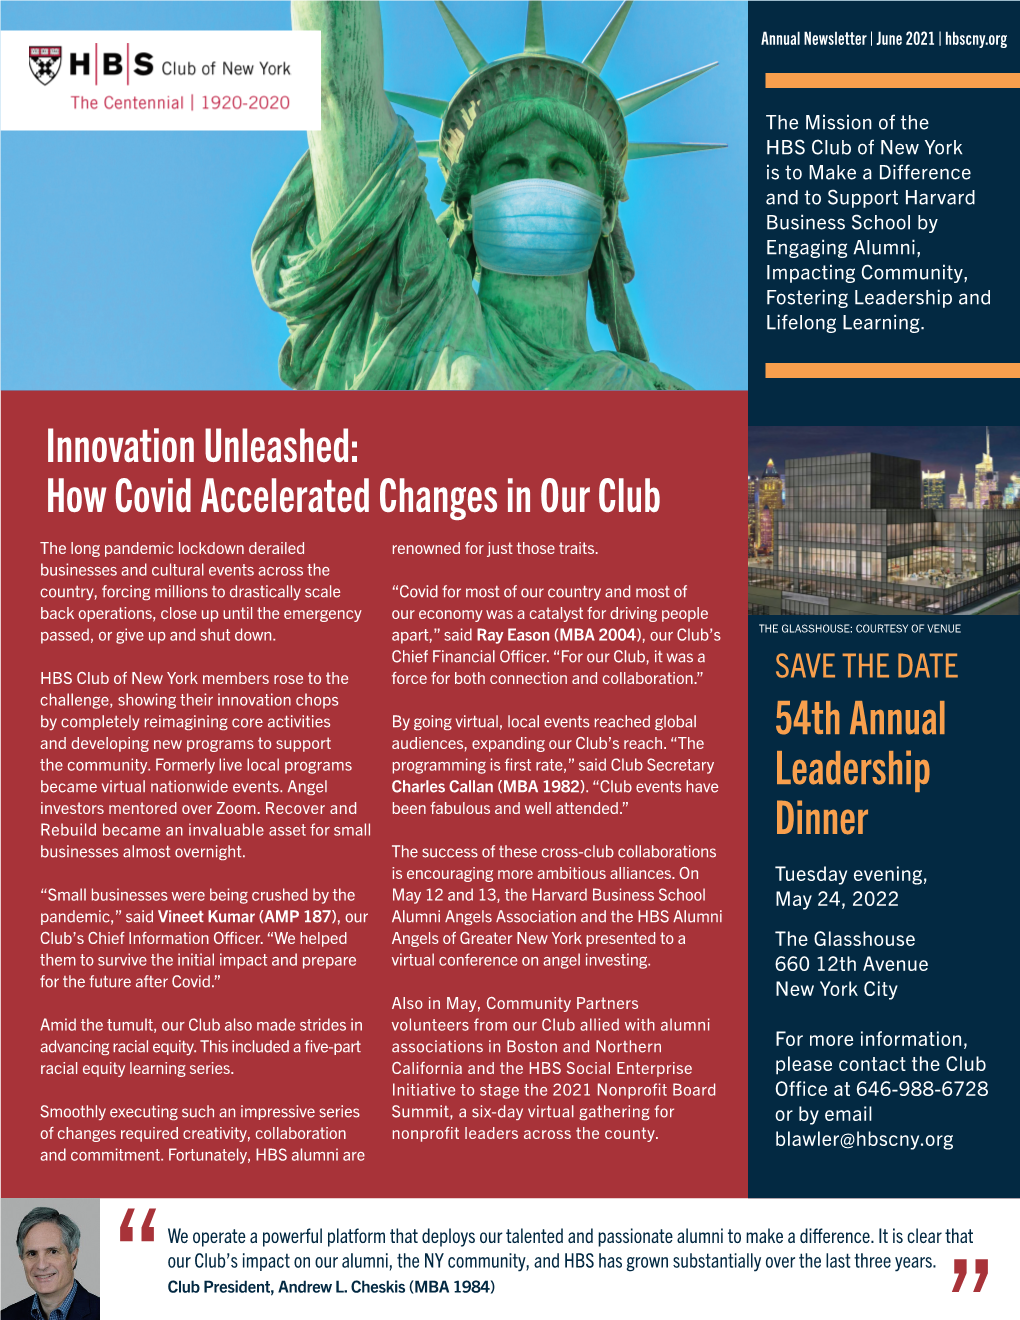 FY 21 HBS Club NY Annual Newsletter